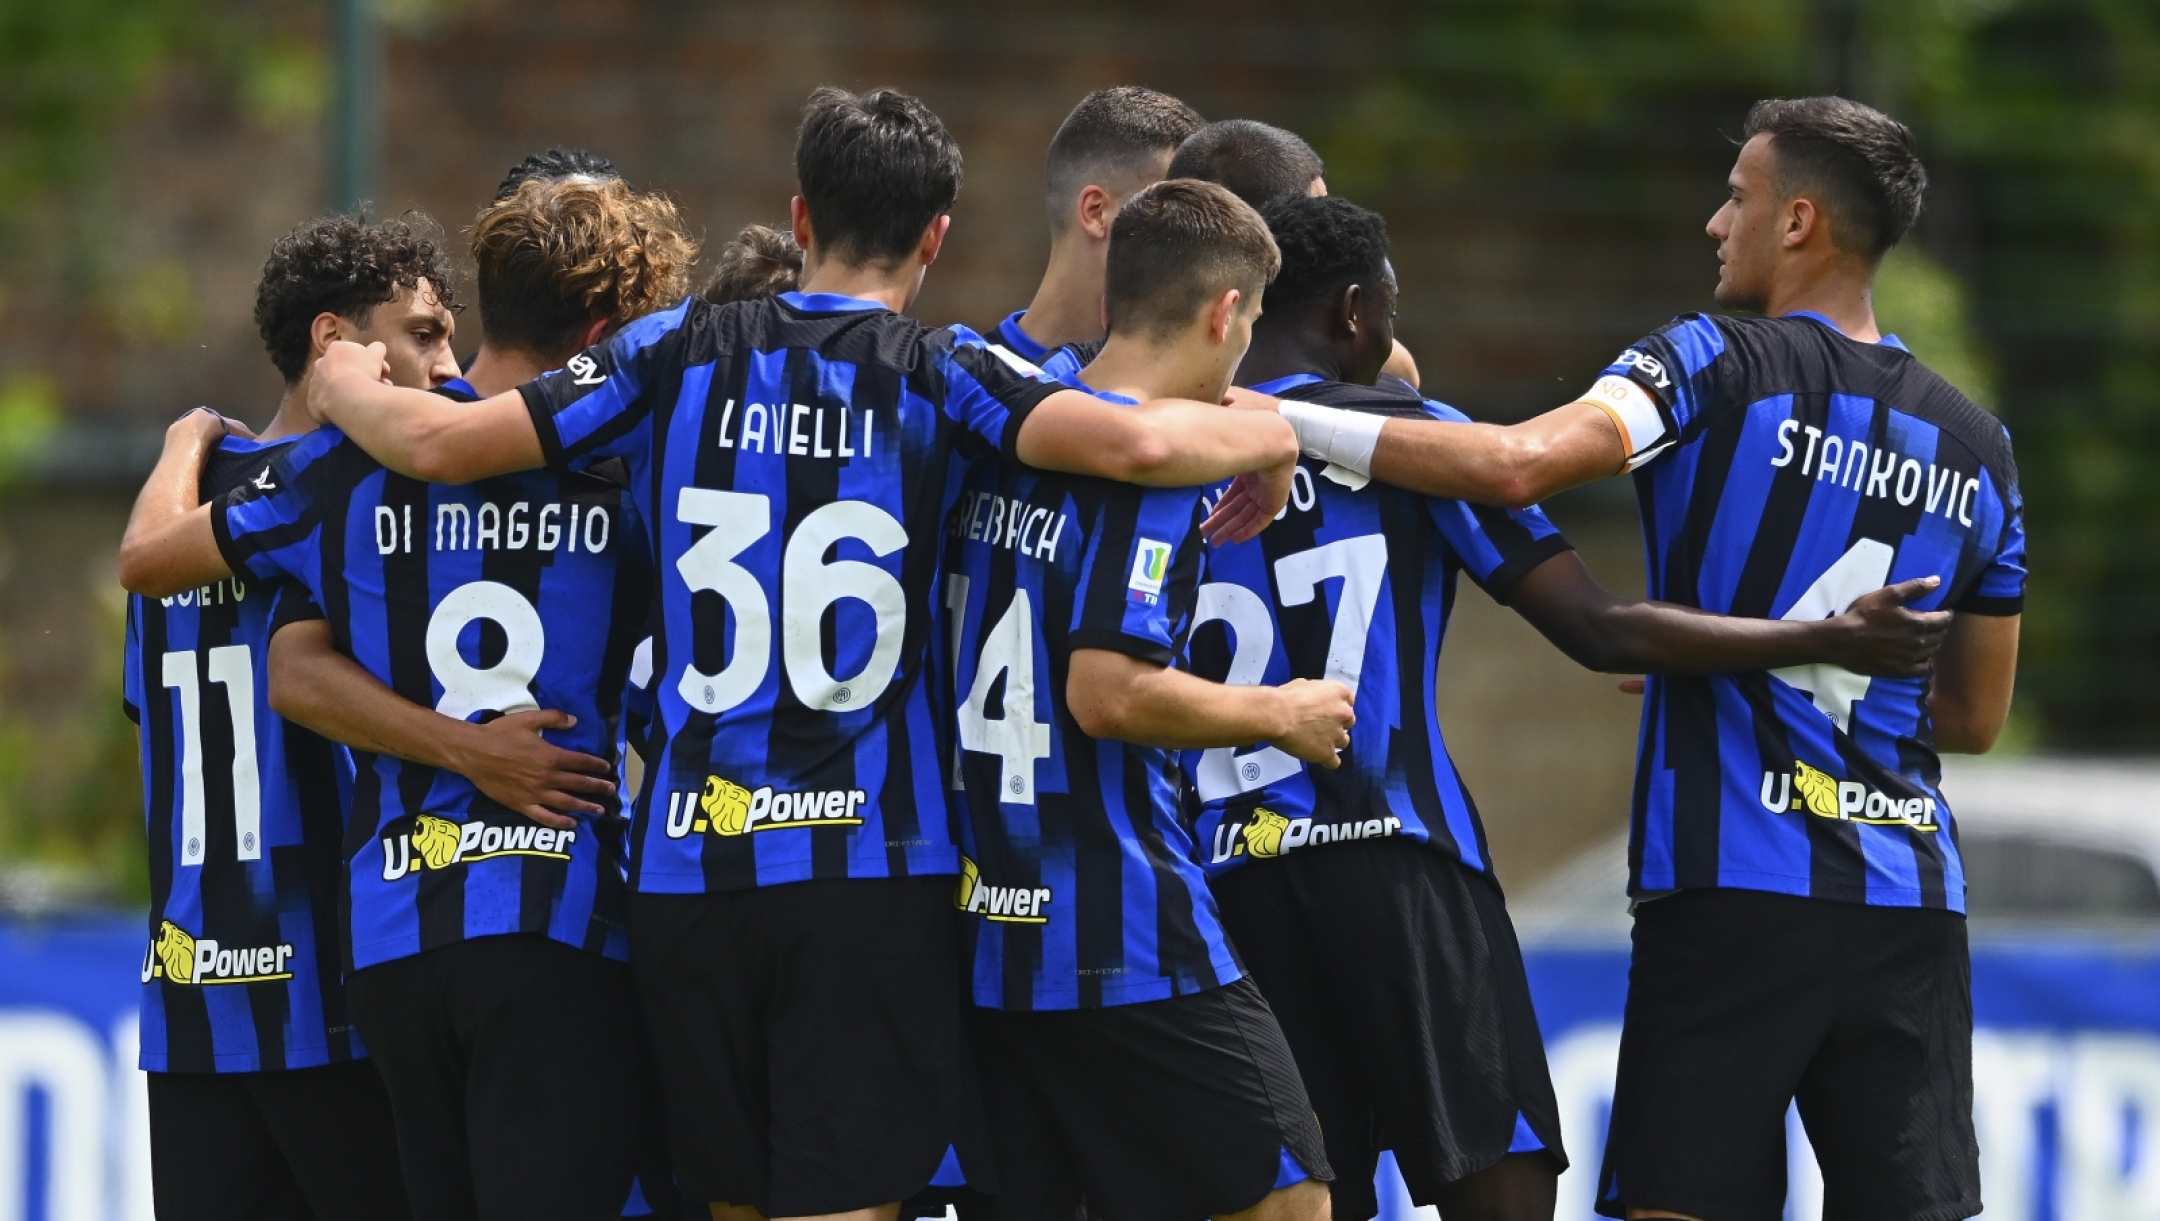 MILAN, ITALY - MAY 18: Riccardo Miconi of FC Internazionale U19 celebrates after scoring the first goal with teammates in action during the Championship Primavera 1 match between FC Internazionale U19 and Atalanta U19 at the Konami Youth Development Center on May 18, 2024 in Milan, Italy. (Photo by Mattia Pistoia - Inter/Inter via Getty Images)